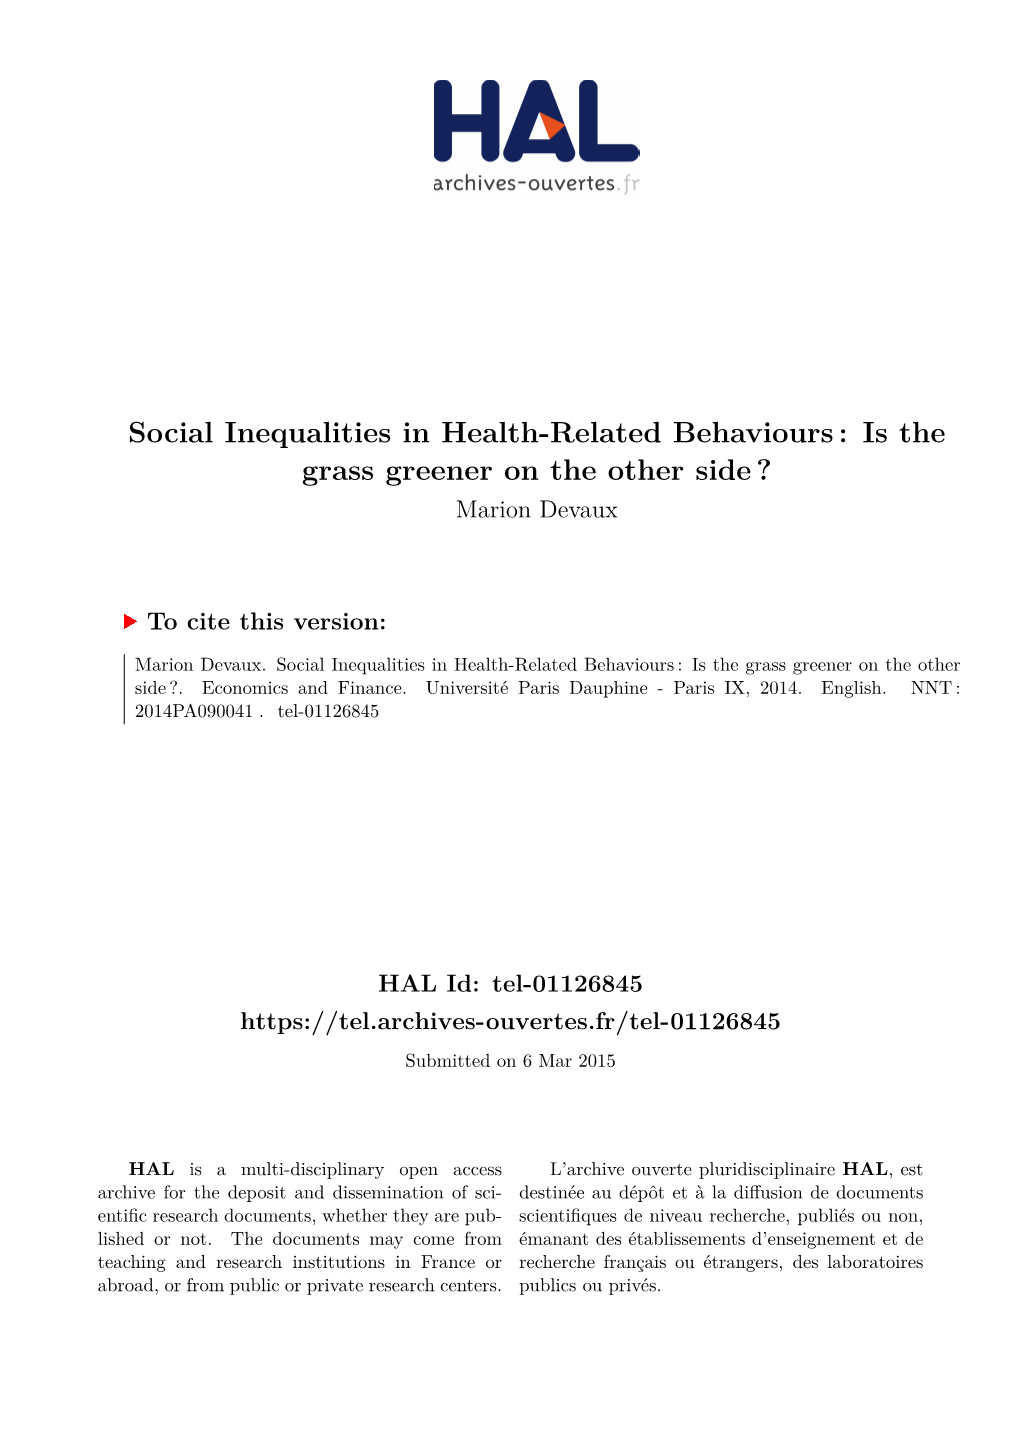 Social Inequalities in Health-Related Behaviours : Is the Grass Greener on the Other Side ? Marion Devaux